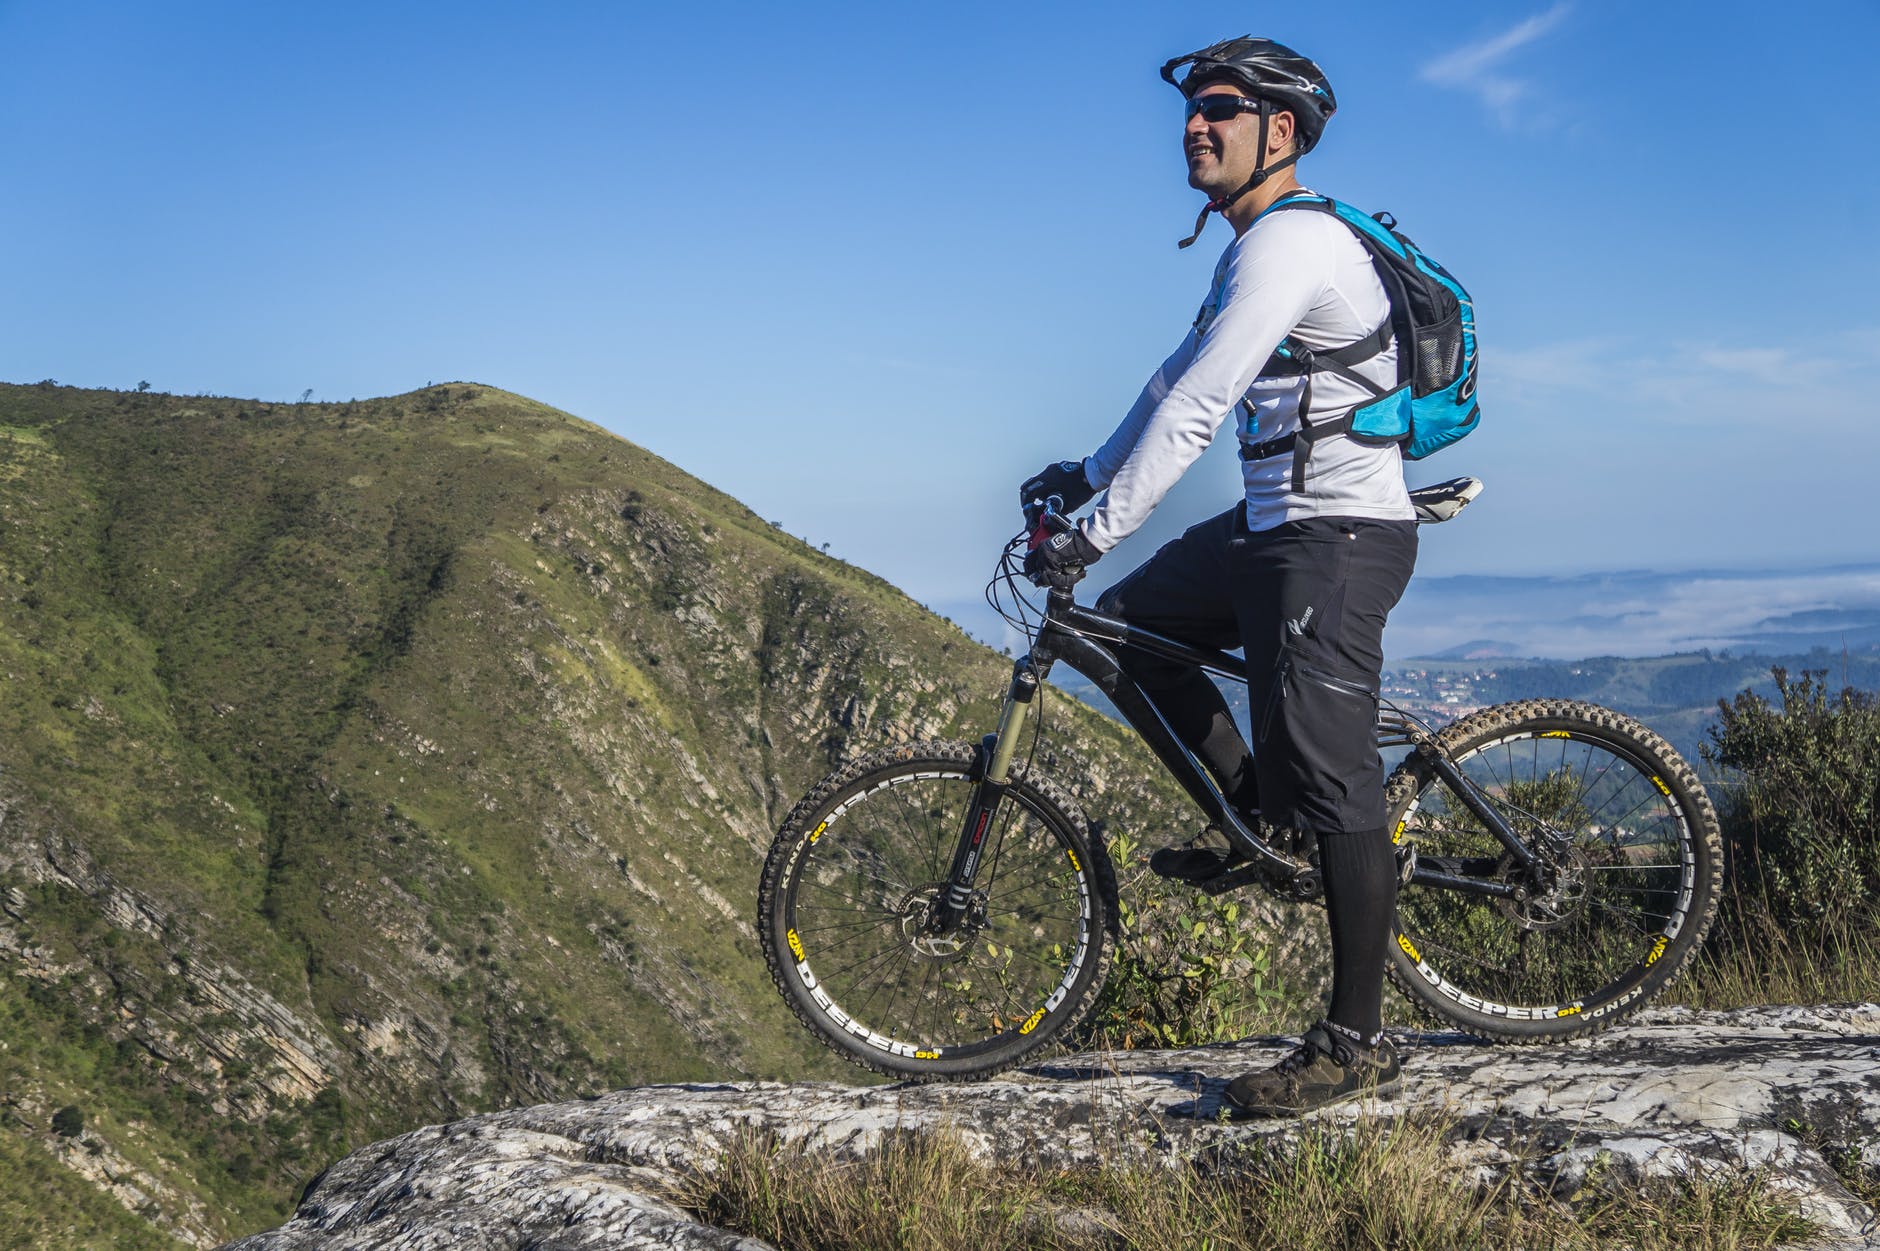 man with white shirt riding abicycle on a mountain